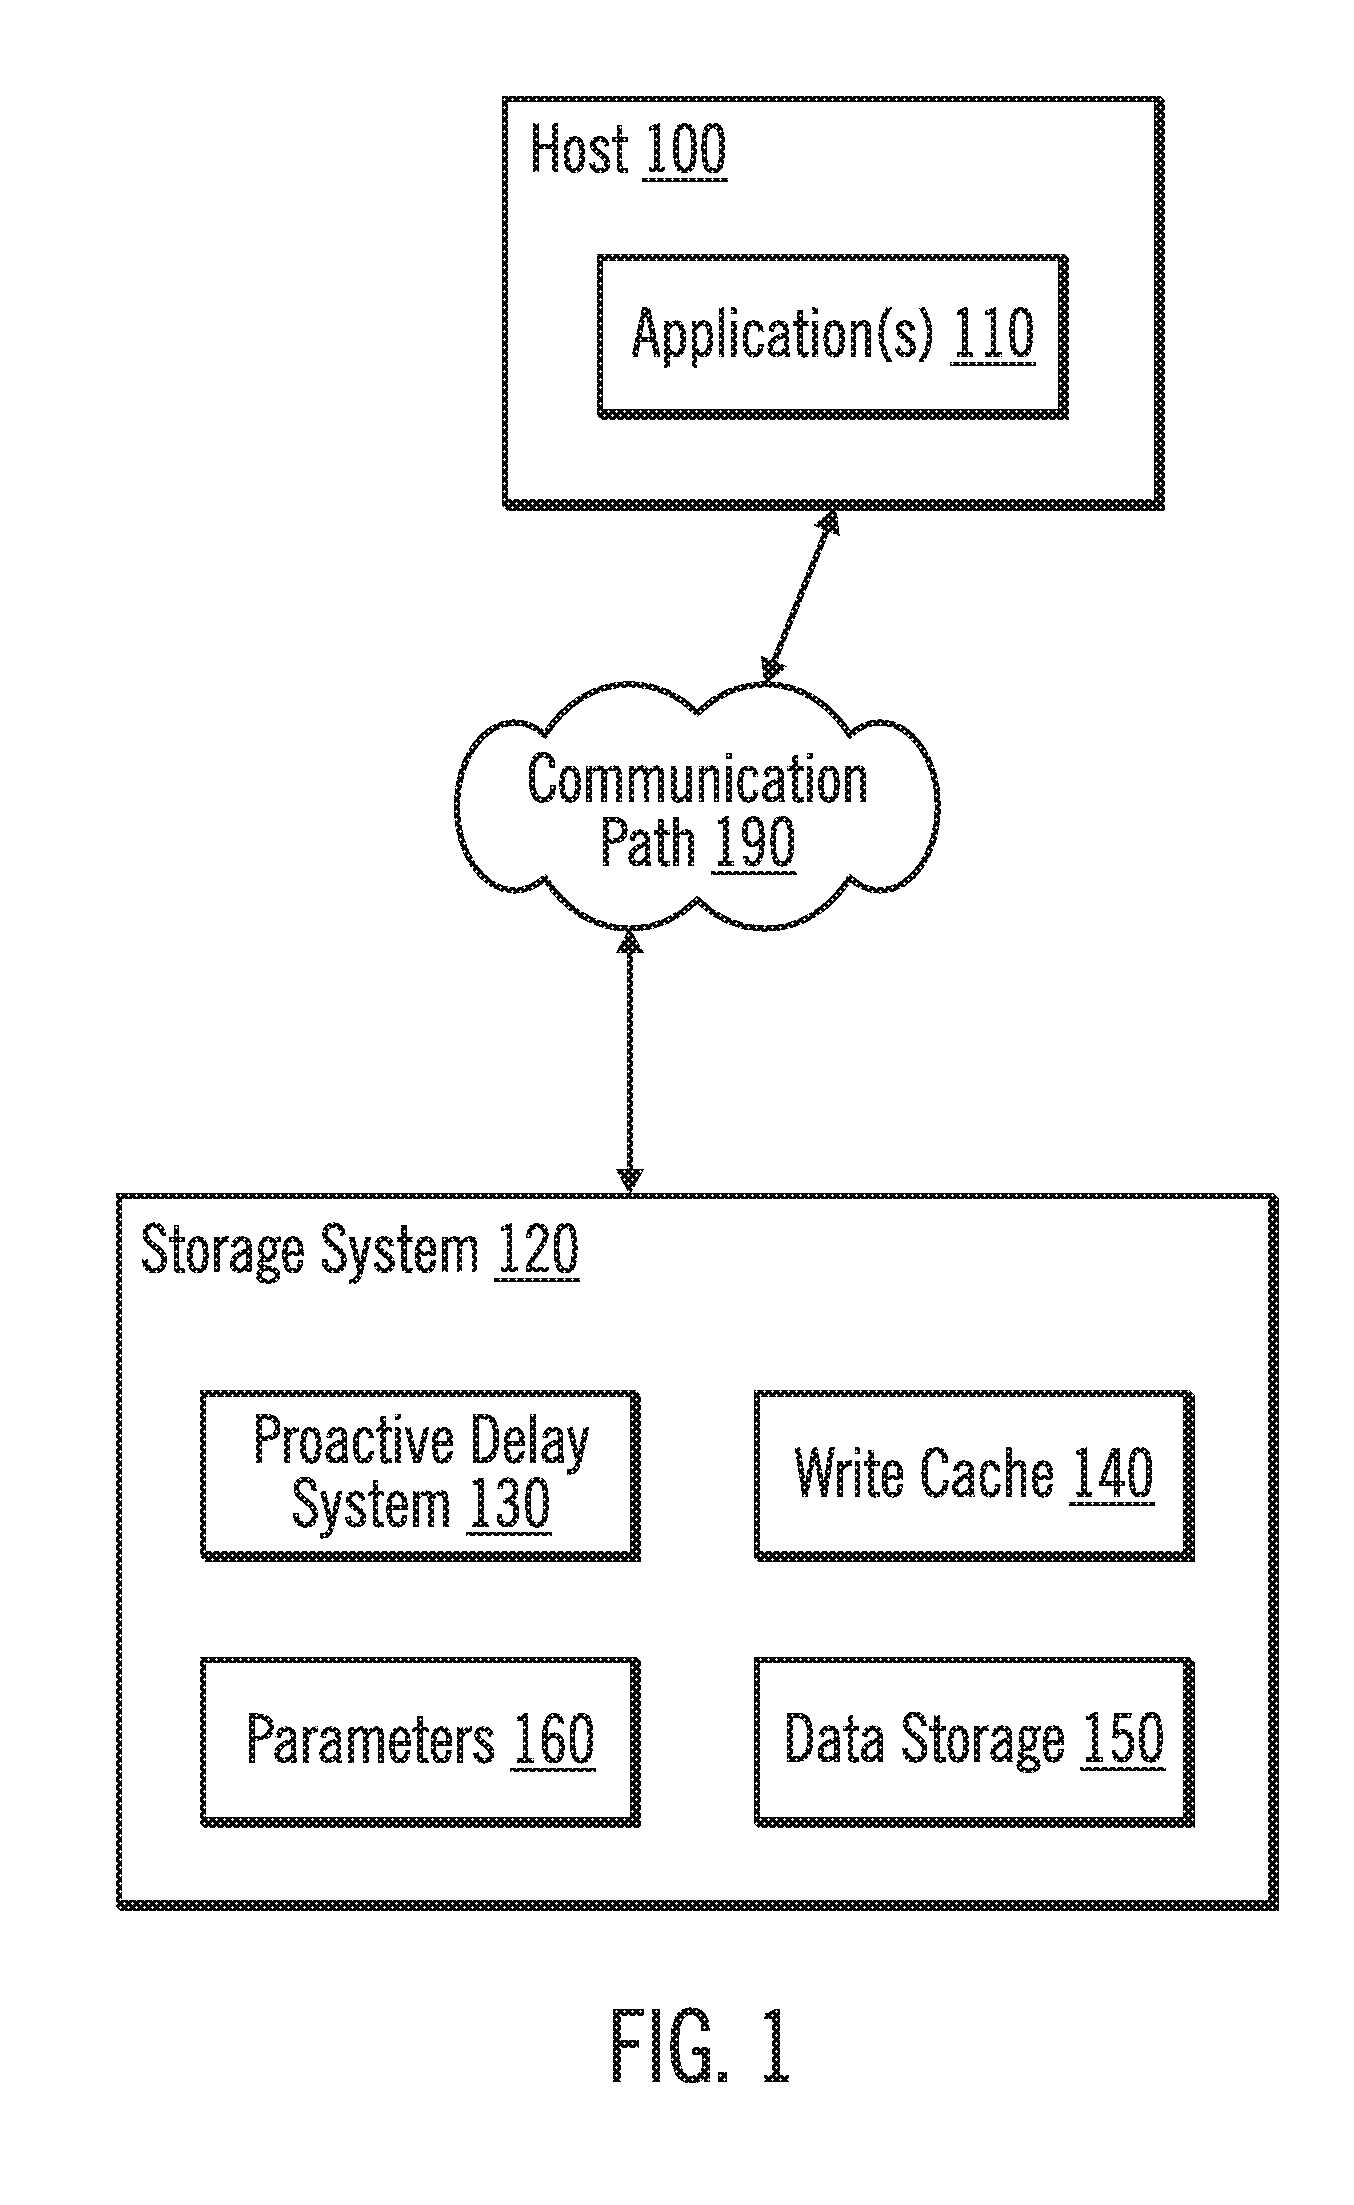 Proactive technique for reducing occurrence of long write service time for a storage device with a write cache